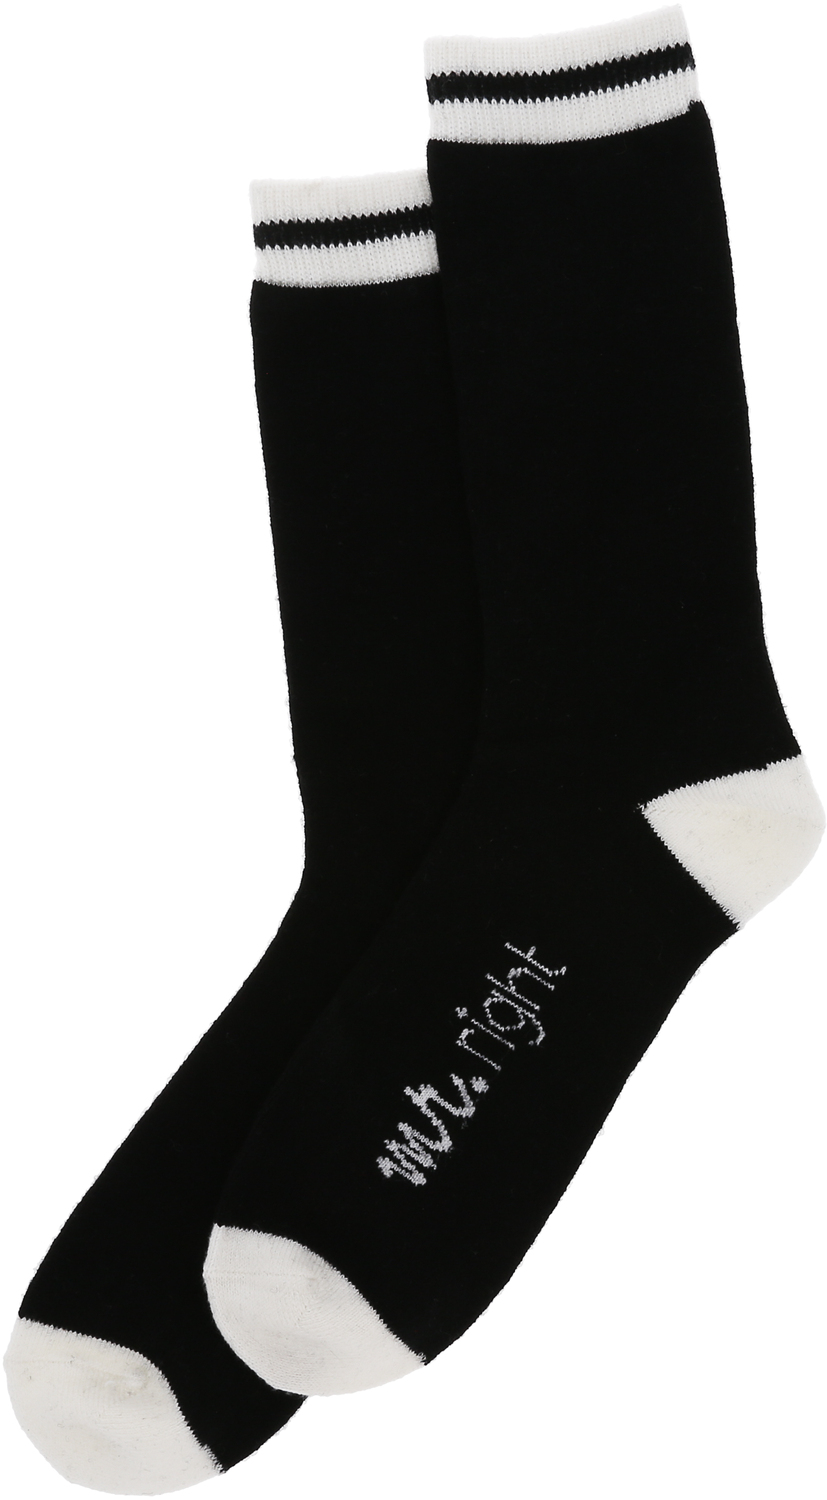 Mr. Right by Love Grows - Mr. Right - Men's Crew Sock